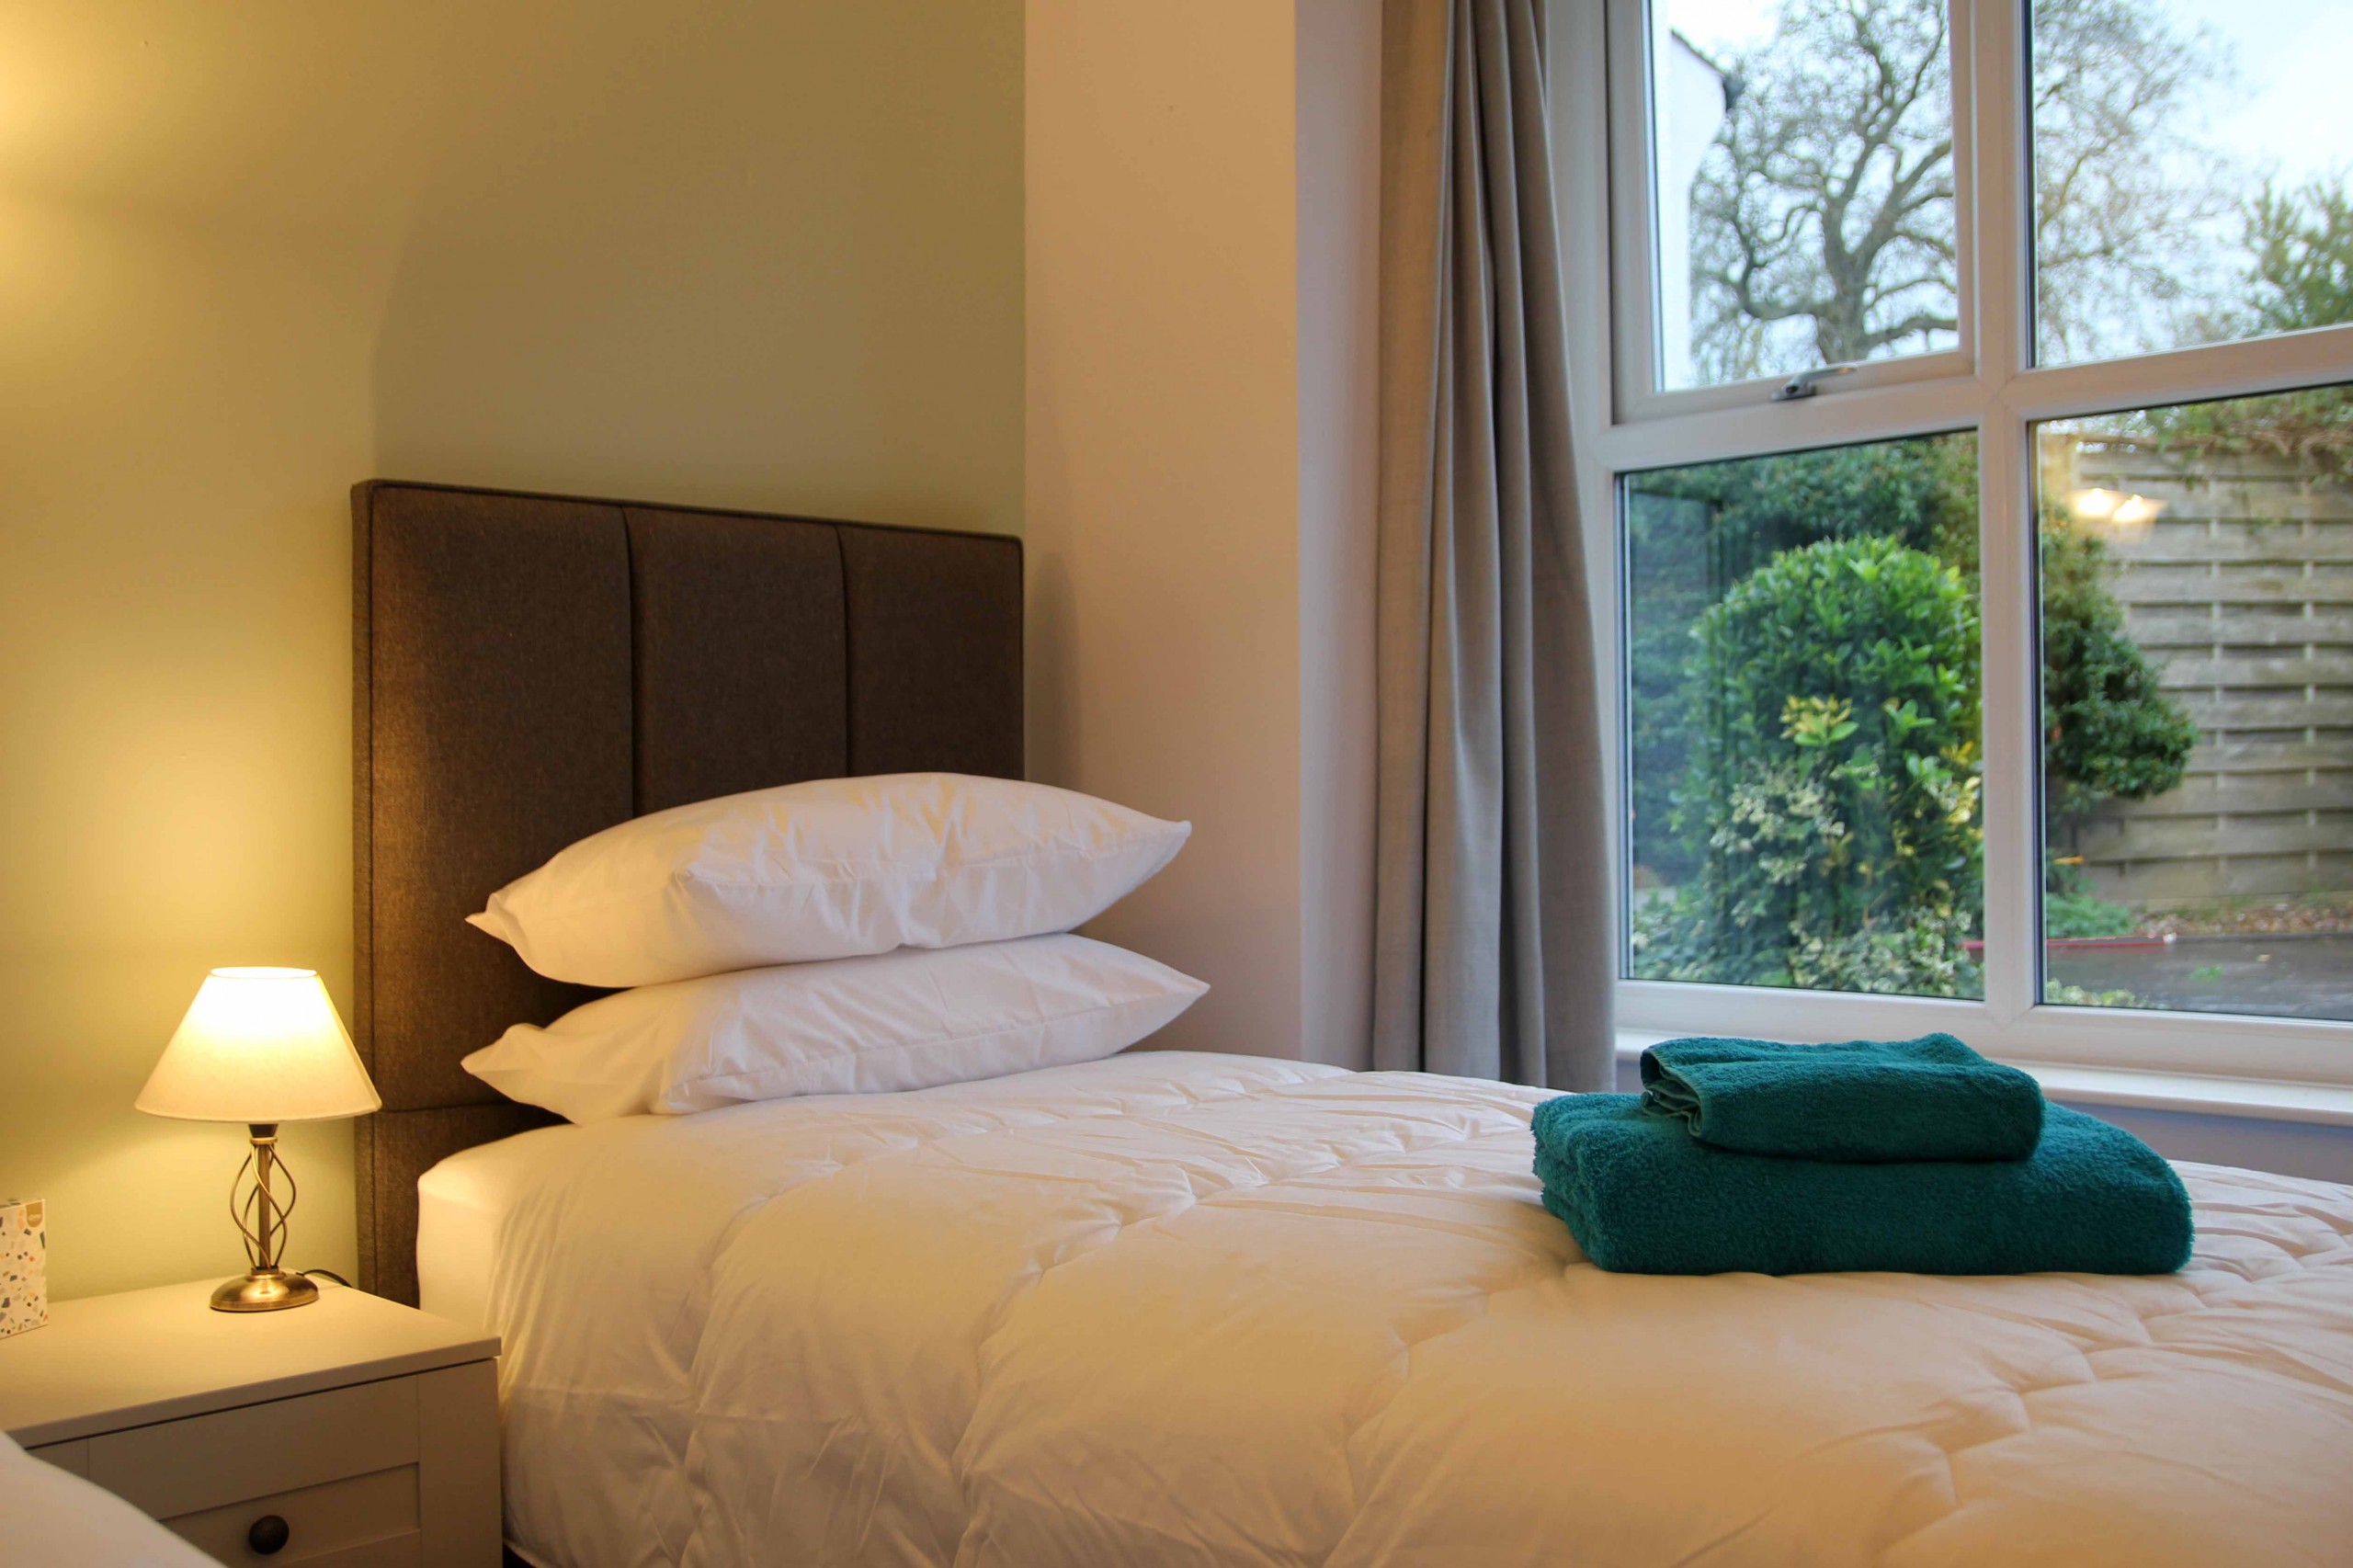 Comfortable bed and breakfast accommodation in Kendal - the Gateway to the Lake District